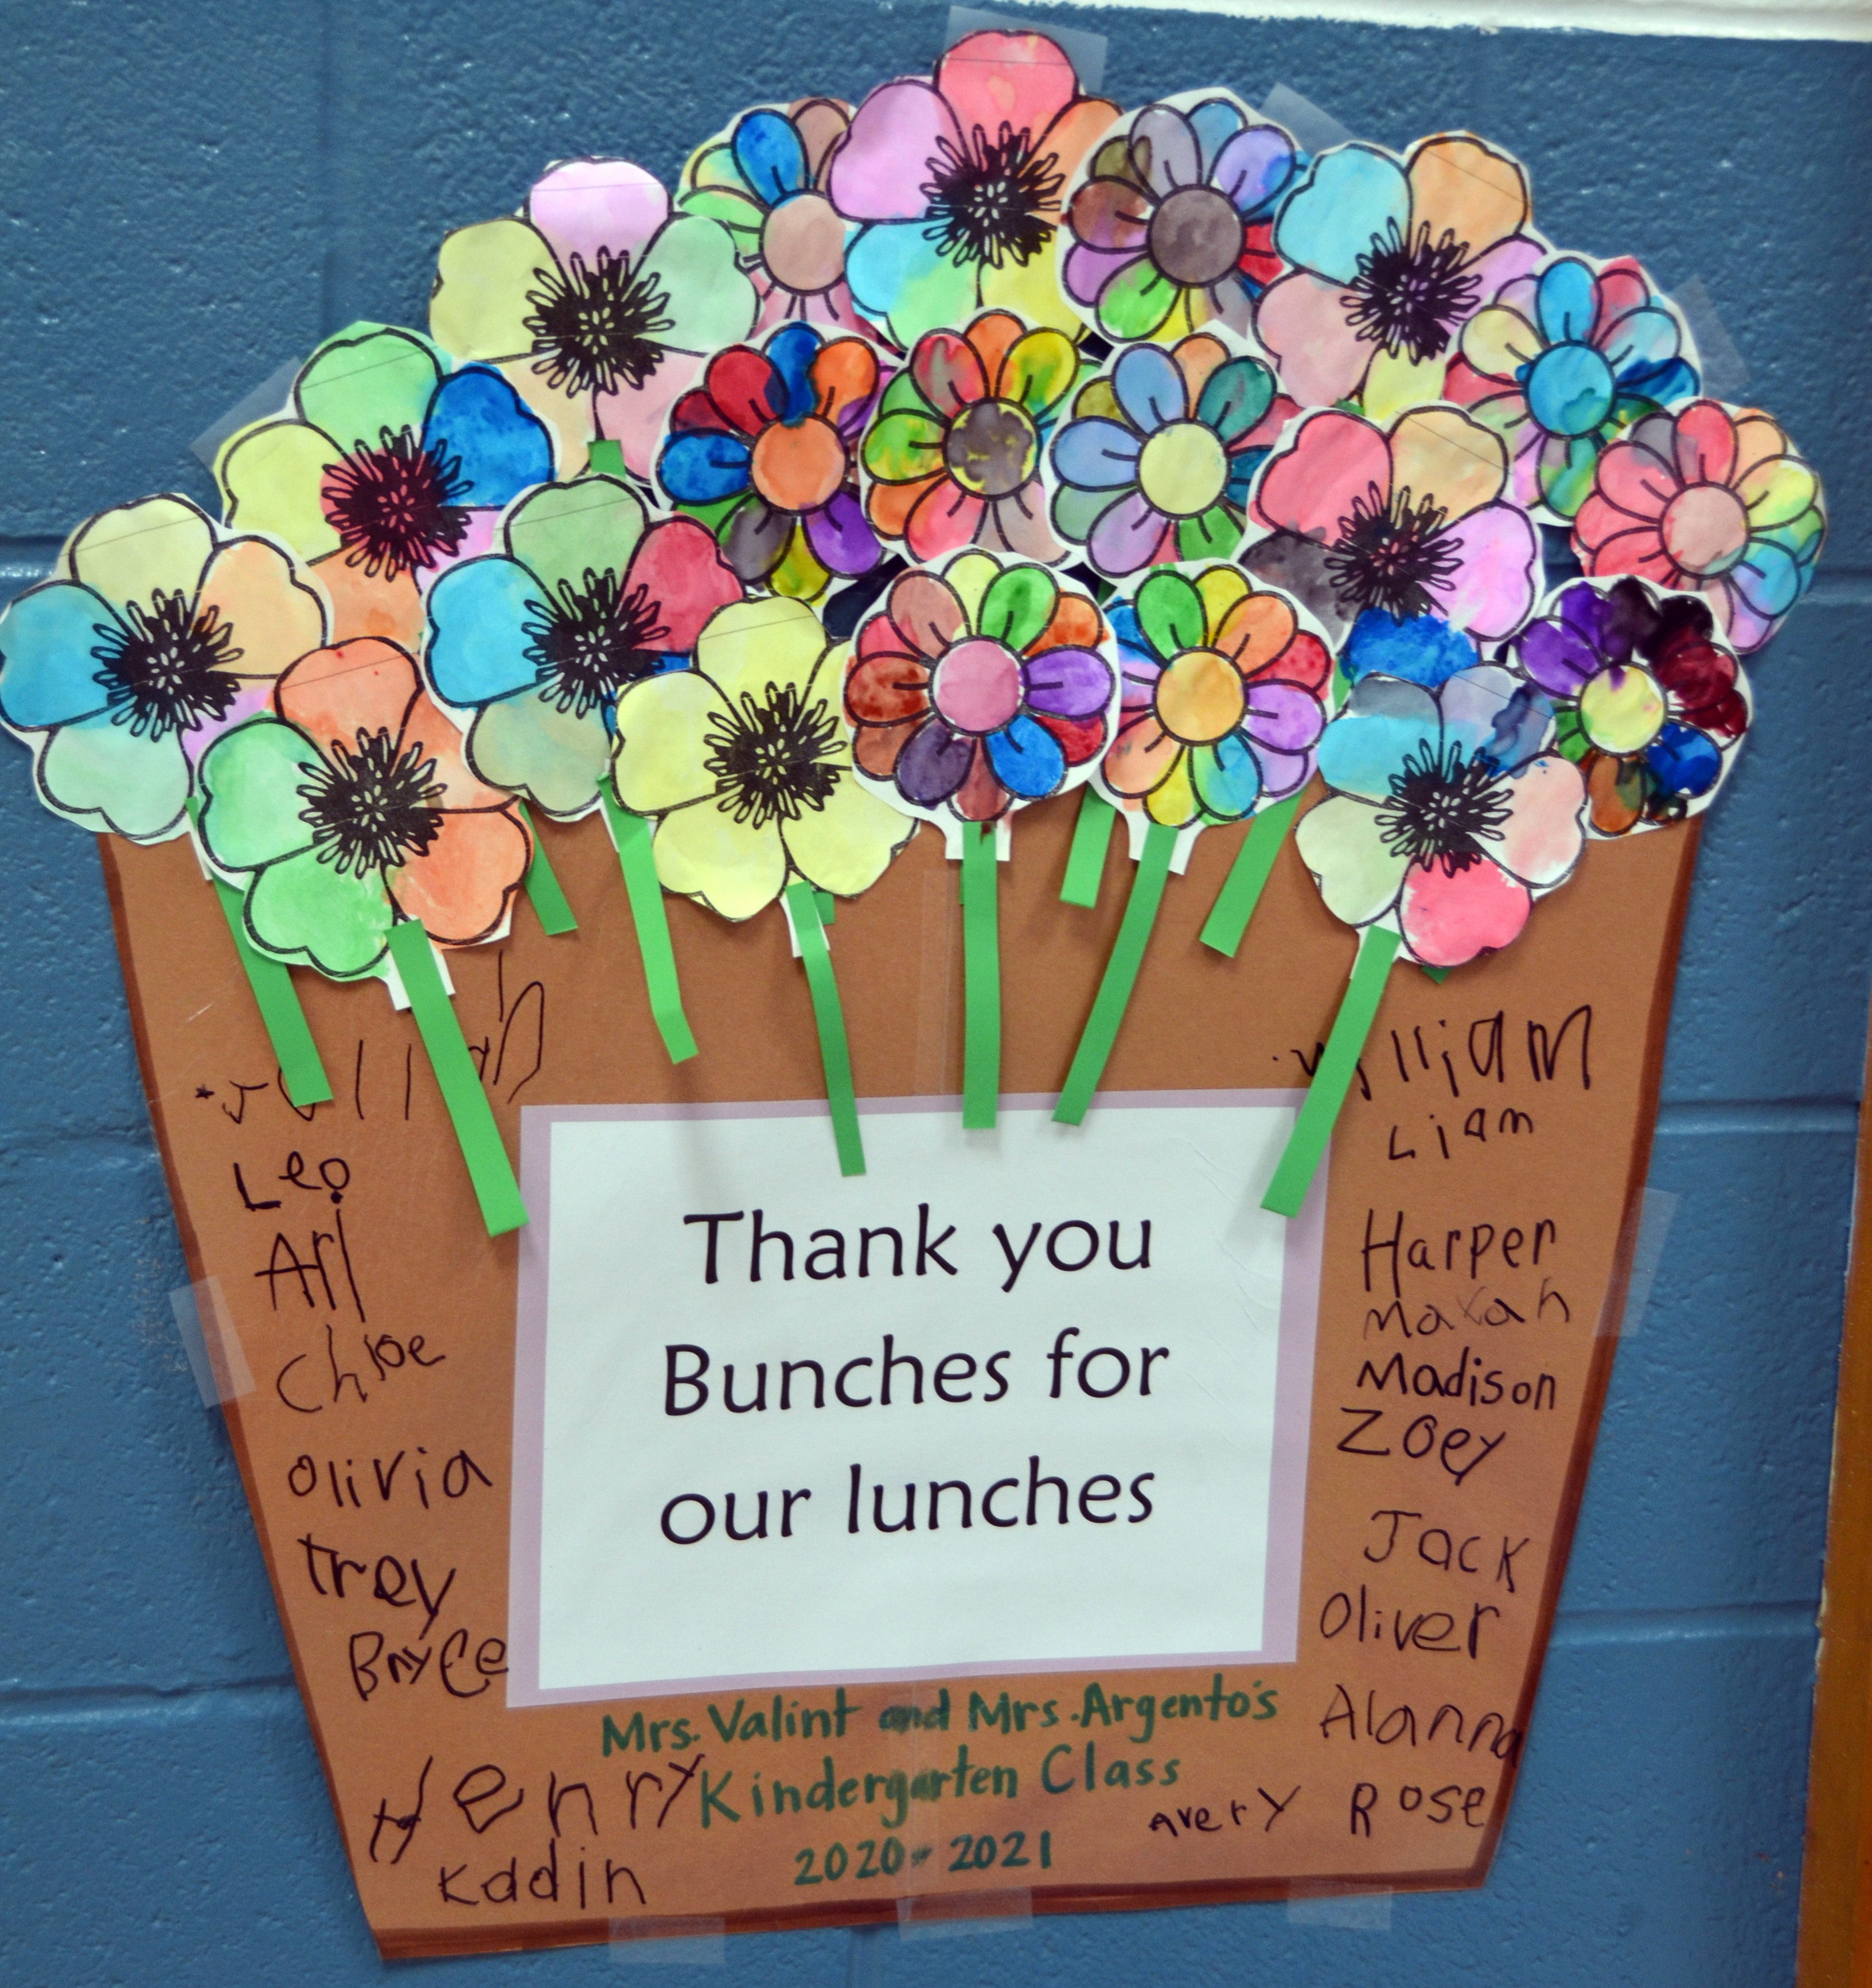 poster artwork of flowers "Thank you bunches for the lunches".